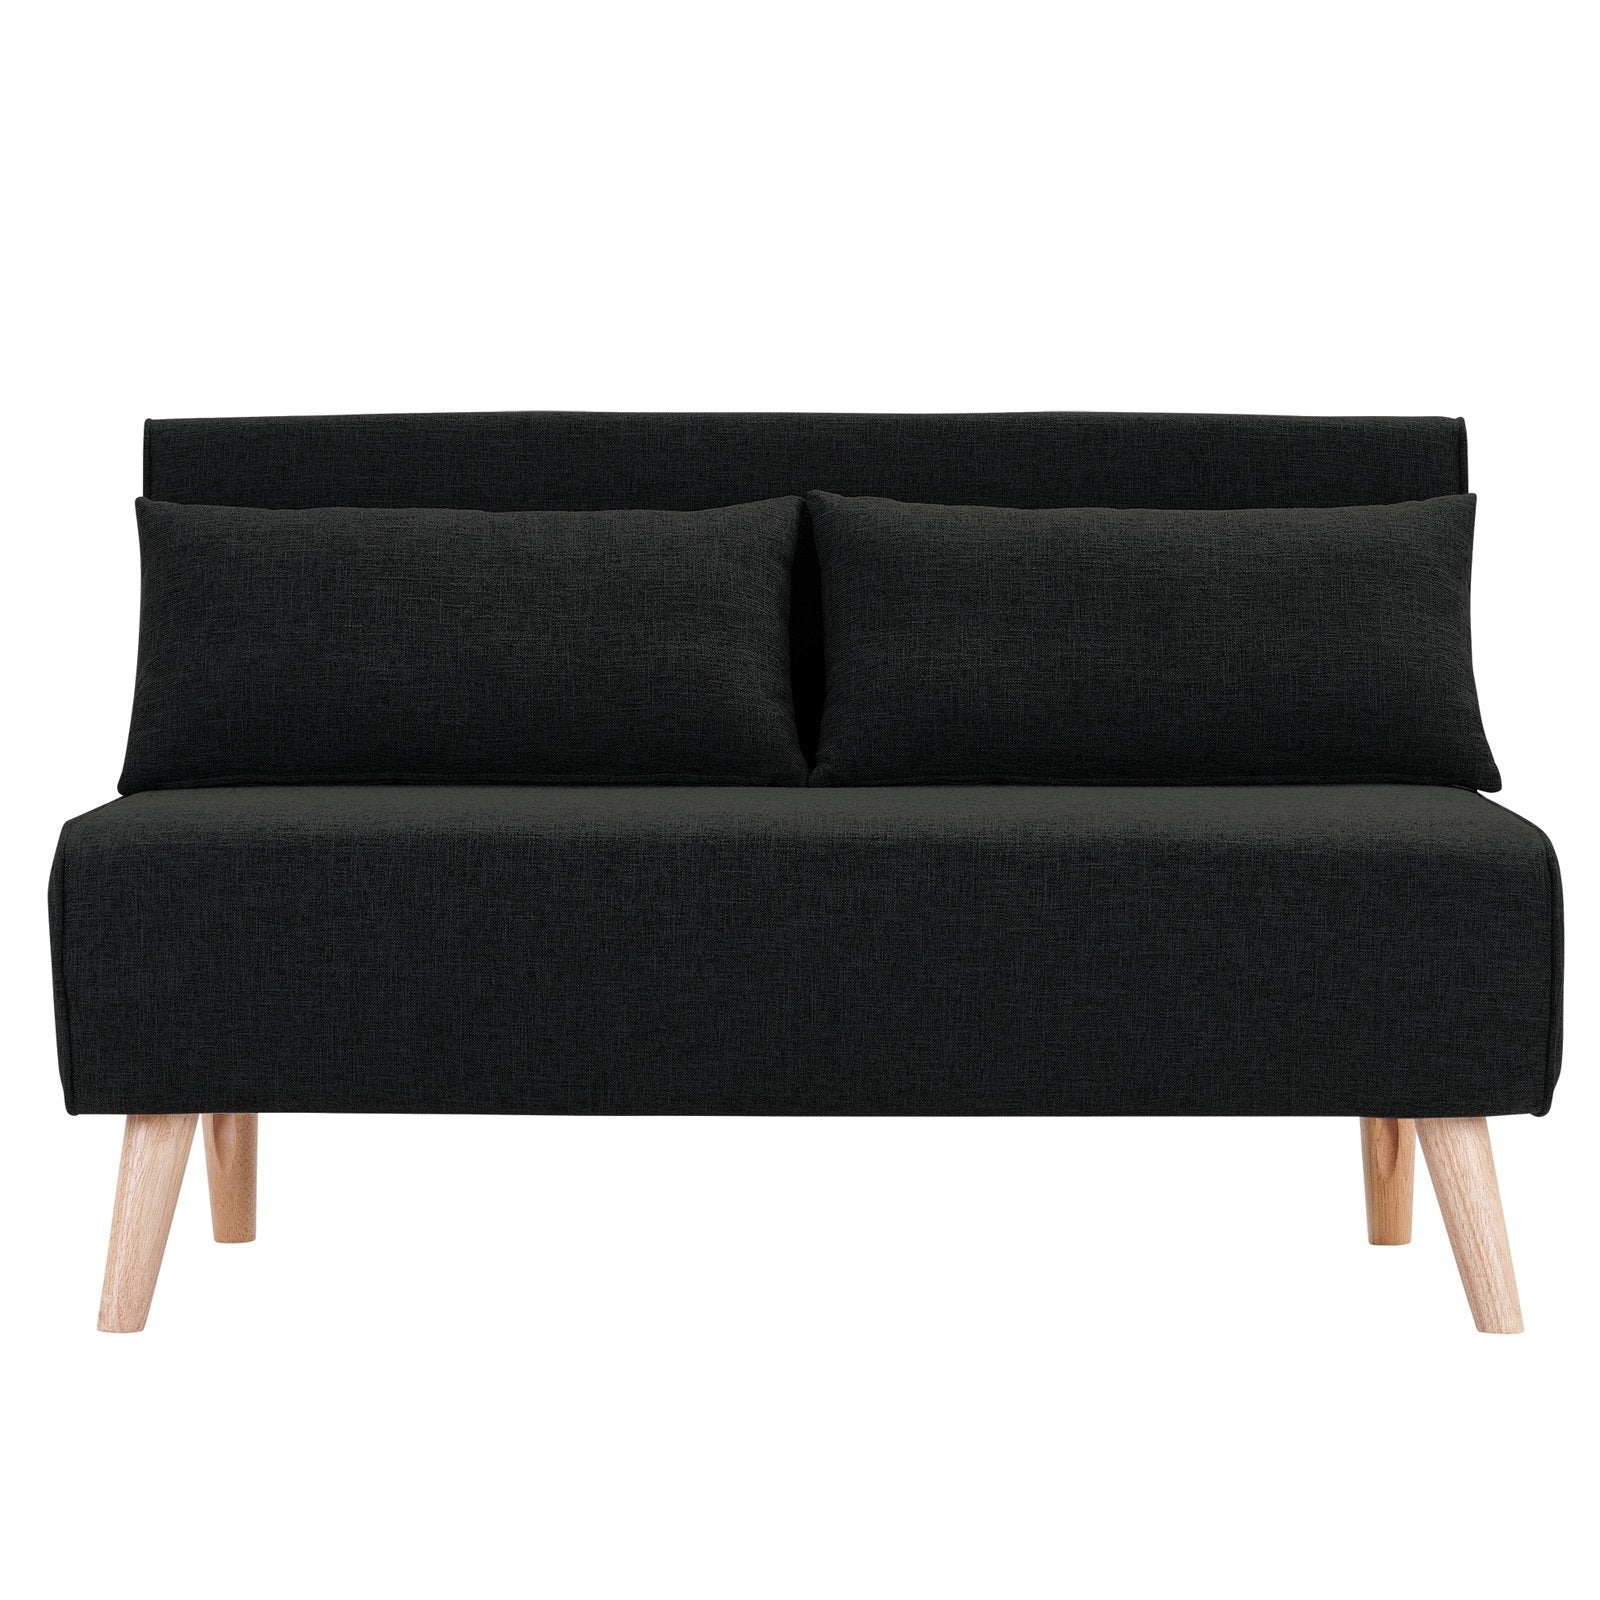 Adjustable 2-Seater Black Faux Velvet Sofa Bed Lounge by Sarantino